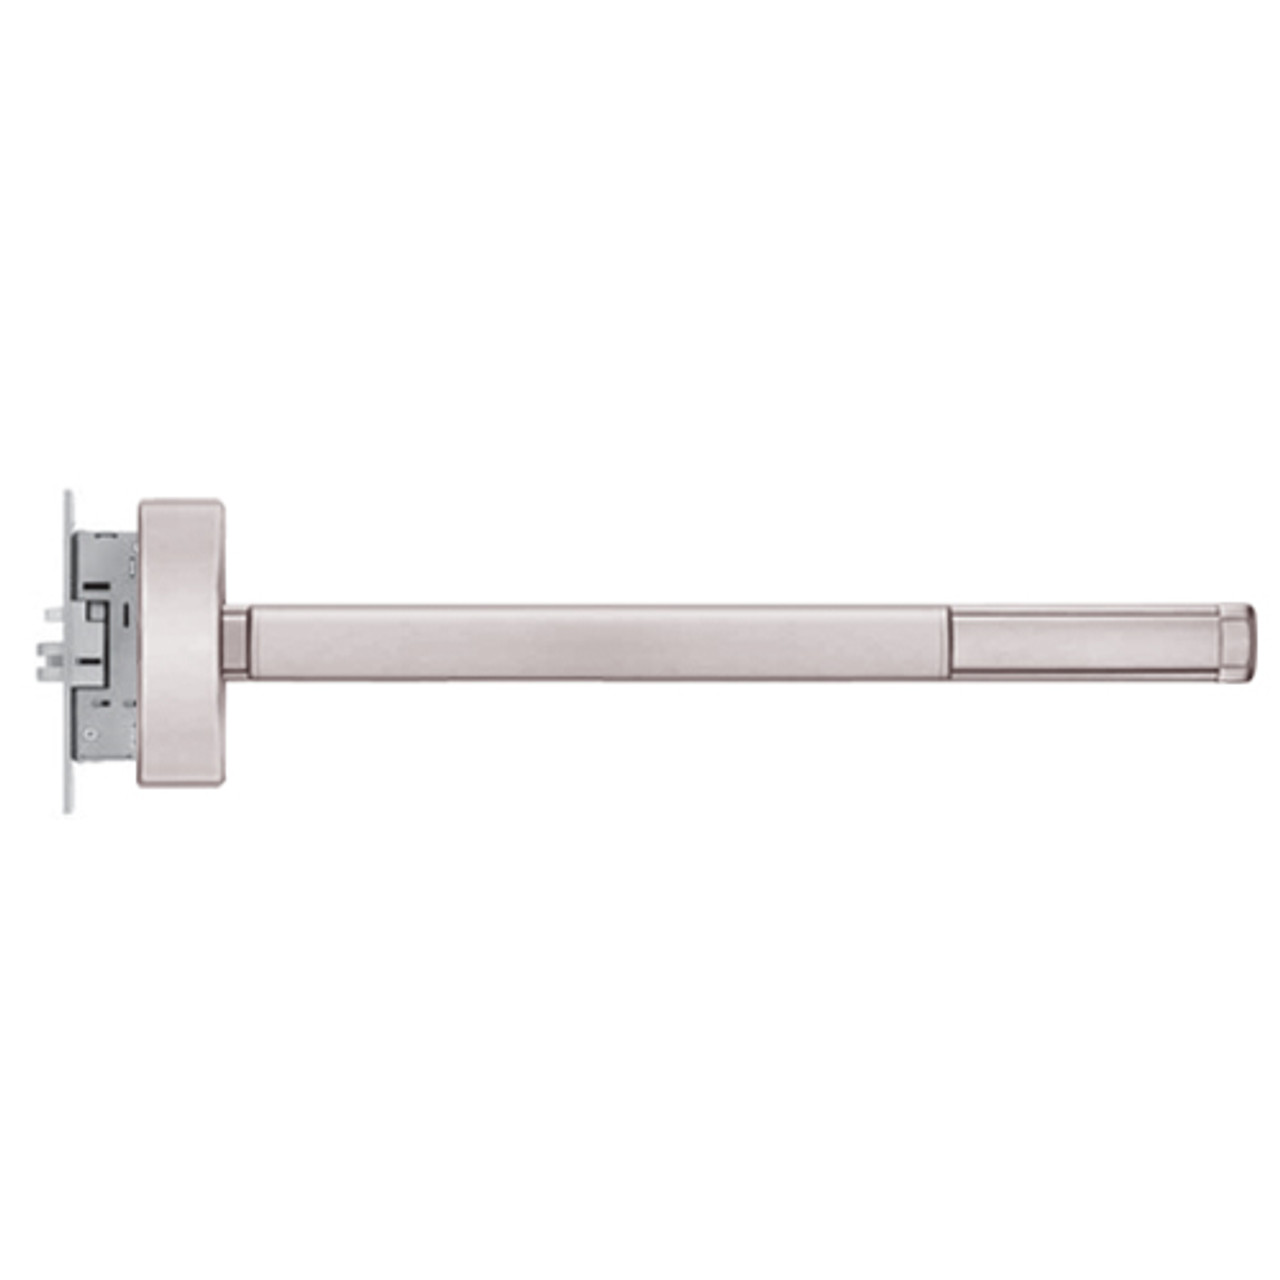 MLRFL2302-RHR-628-36 PHI 2300 Series Fire Rated Apex Mortise Exit Device with Motorized Latch Retraction Prepped for Dummy Trim in Satin Aluminum Finish